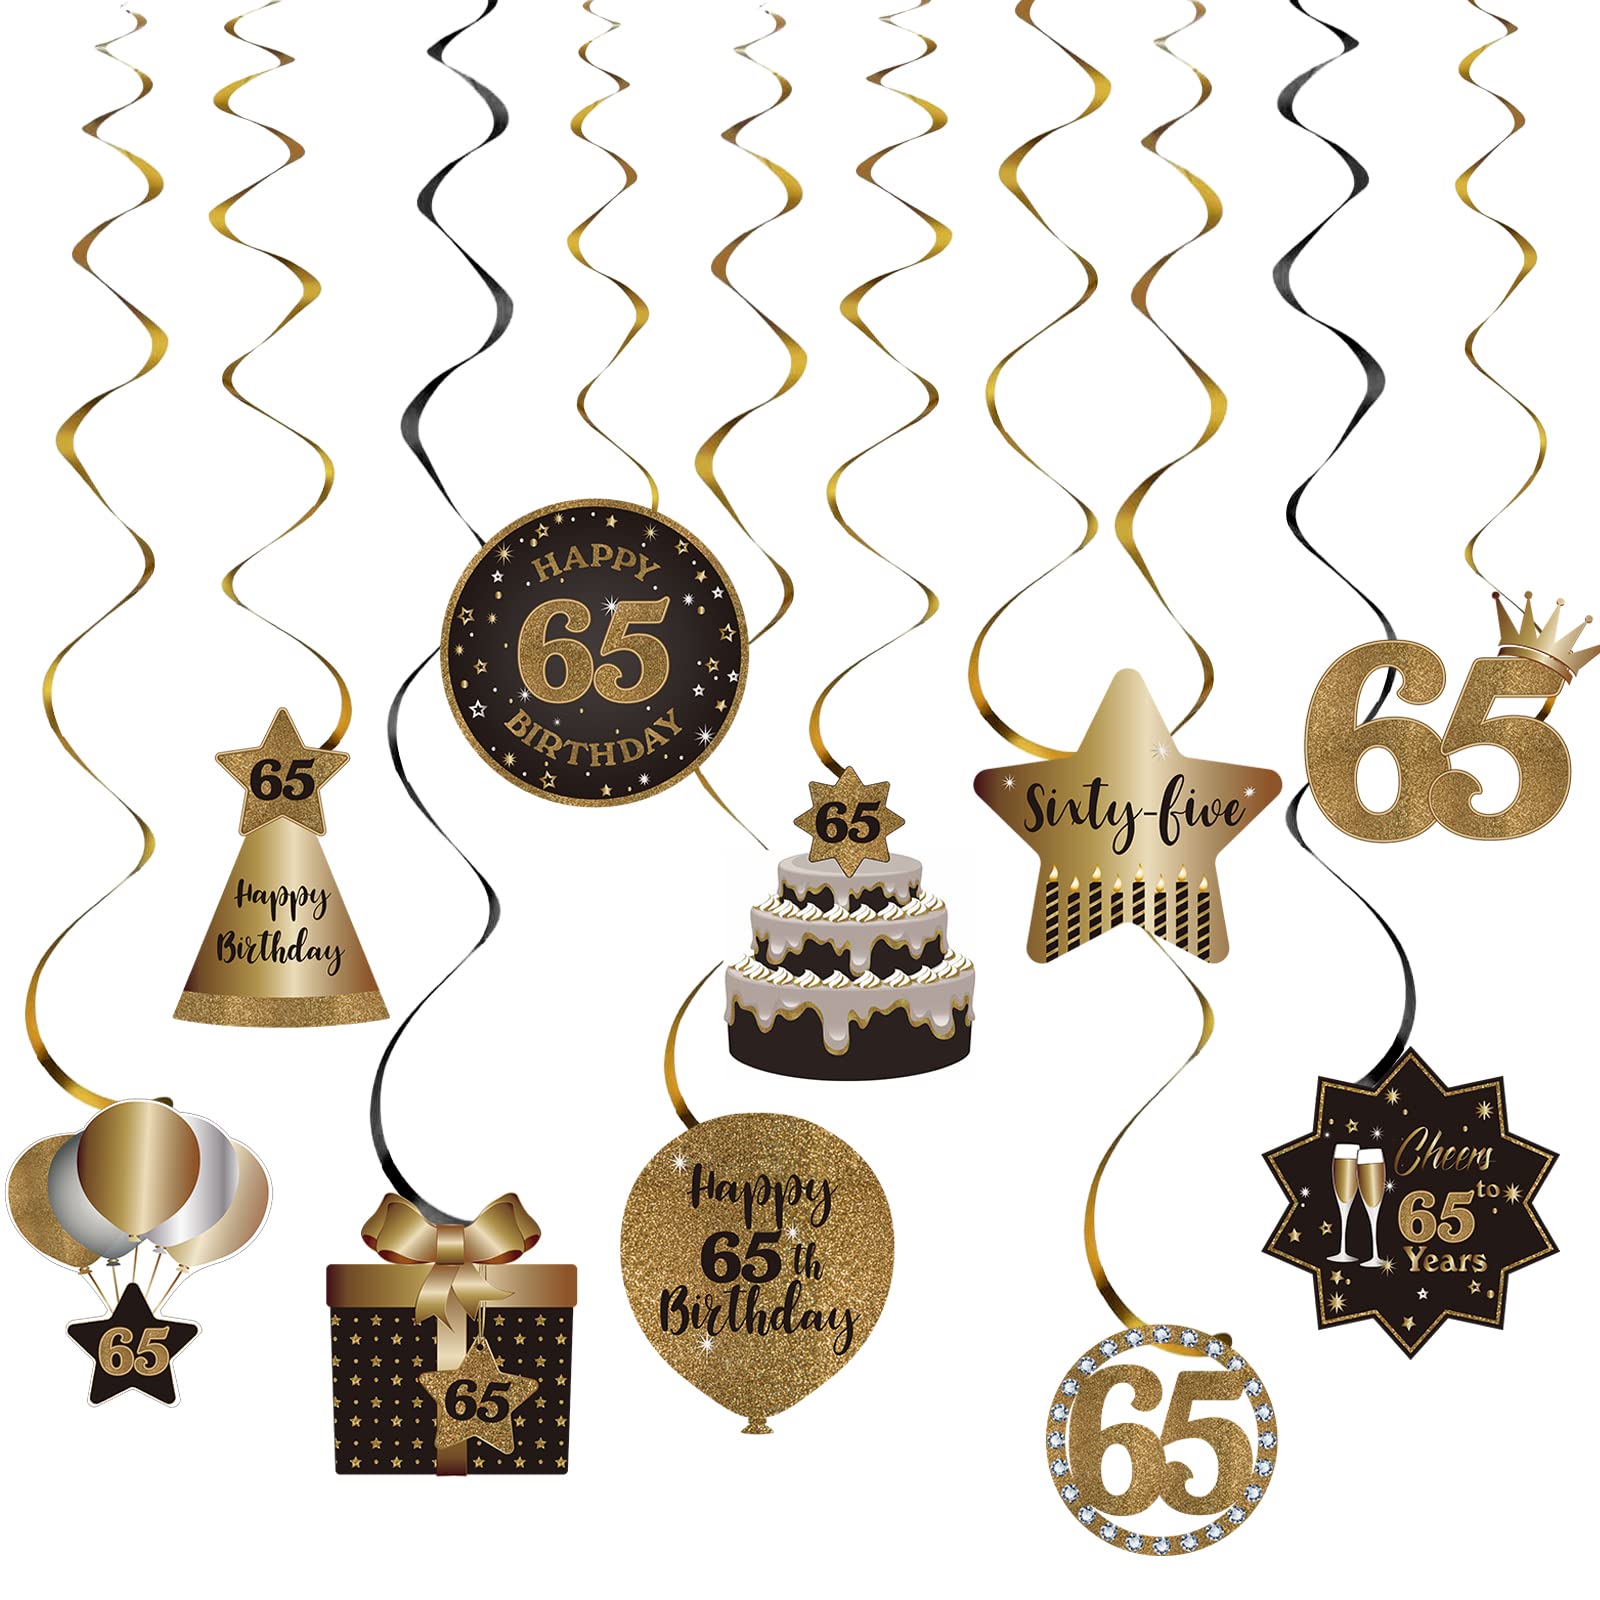 Happy 65th Birthday Party Hanging Swirls Streams Ceiling Decorations, Celebration 65 Foil Hanging Swirls with Cutouts for 65 Years Old Black and Gold Birthday Party Decorations Supplies